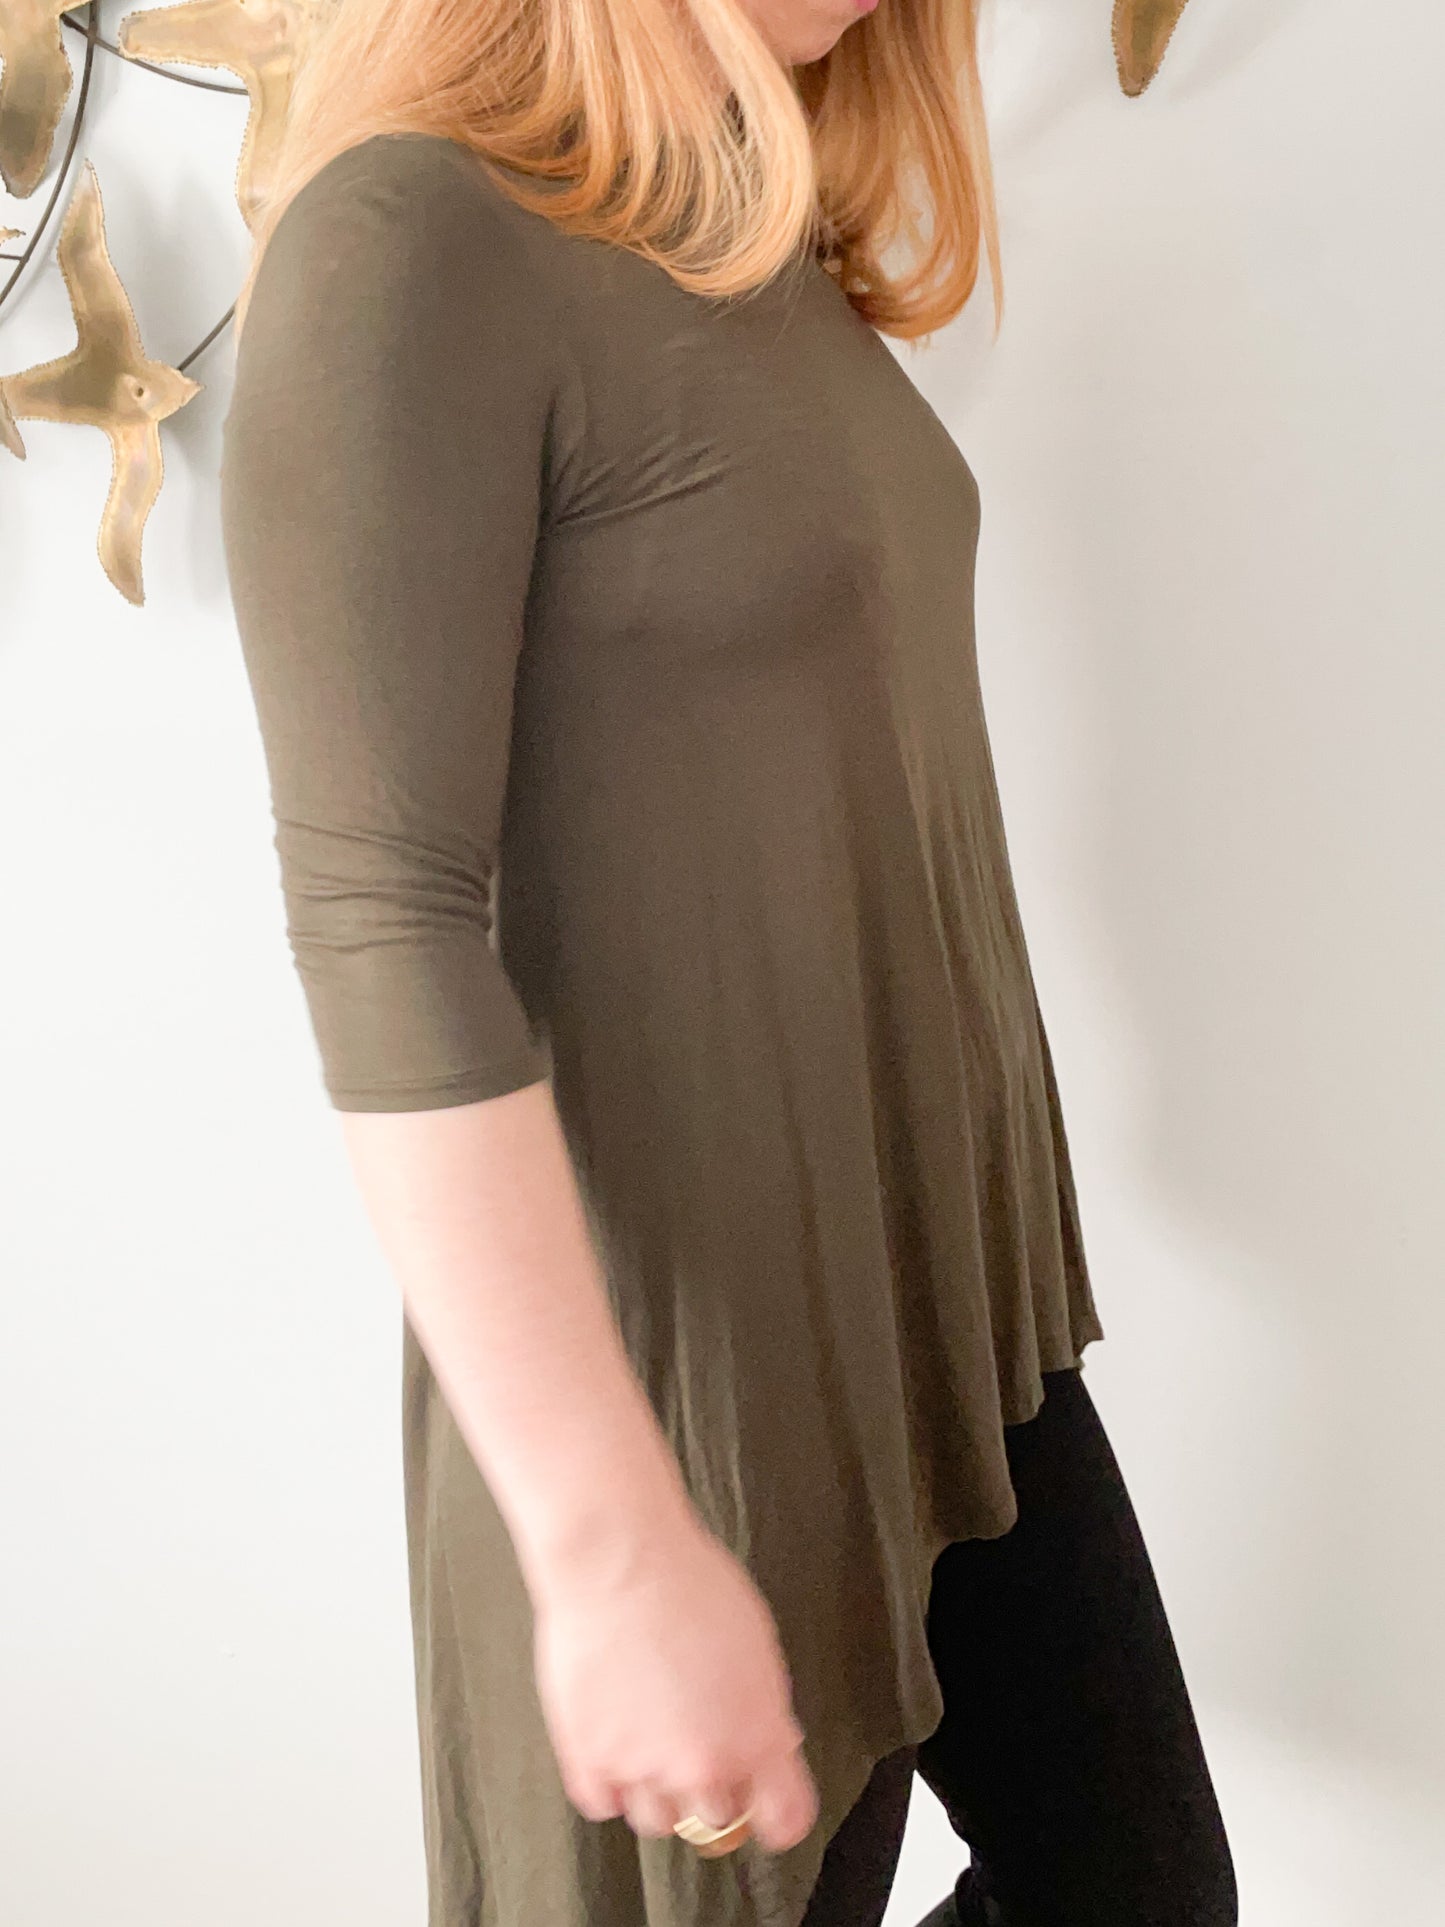 Olive Green Jersey Hi-Low 3/4 Sleeve Tunic Top - XS/S